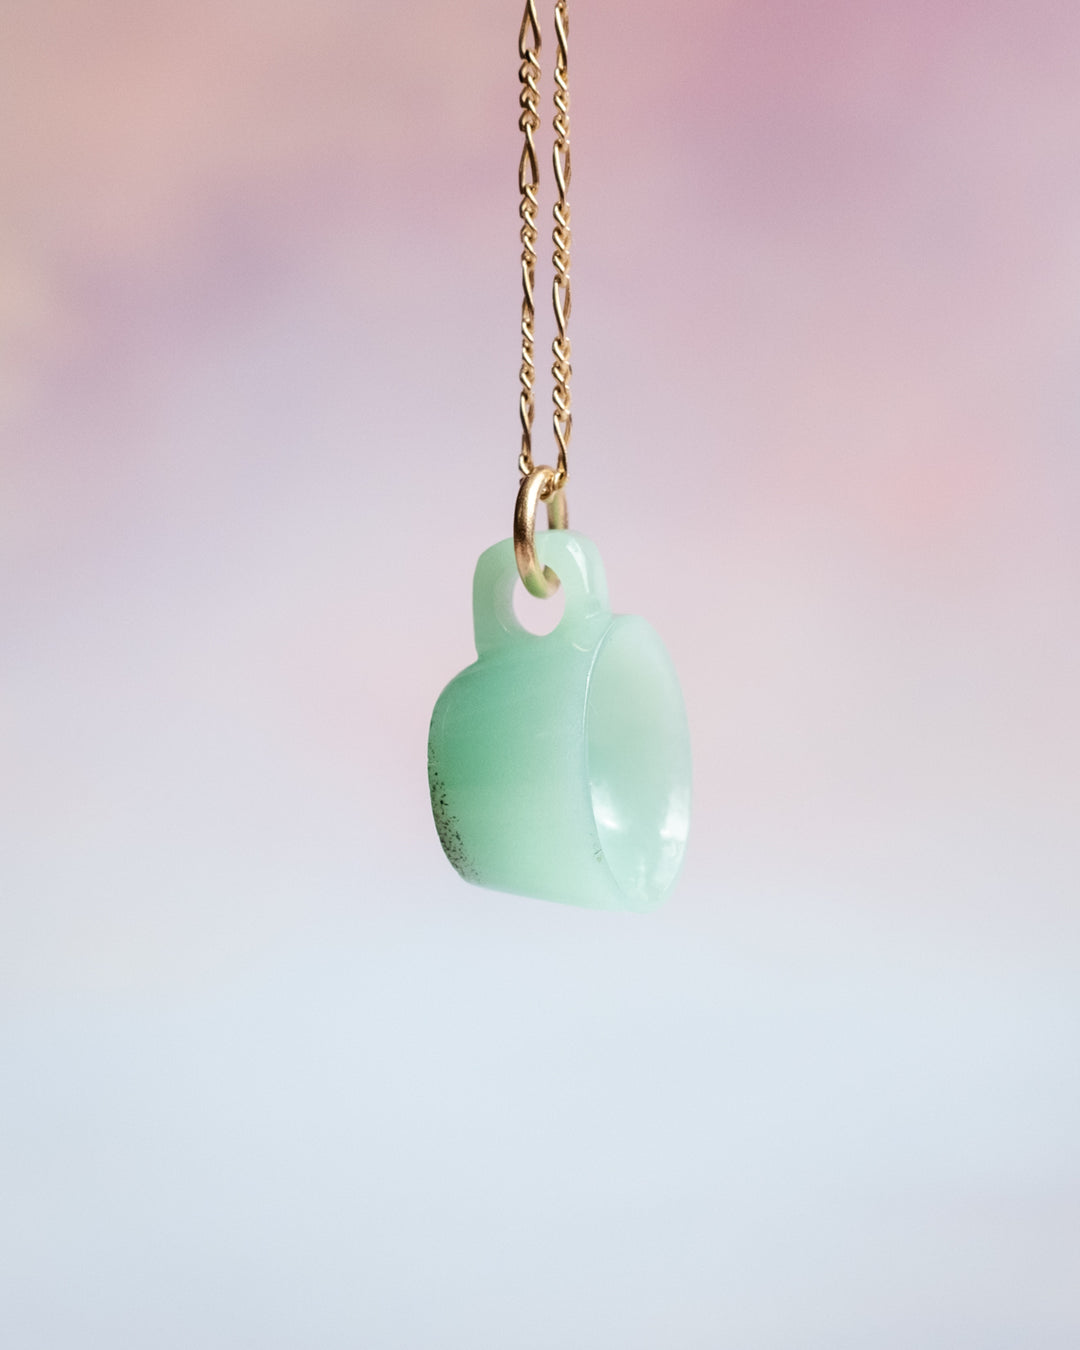 Chrysoprase Hand Carved Mug Necklace - The Healing Pear